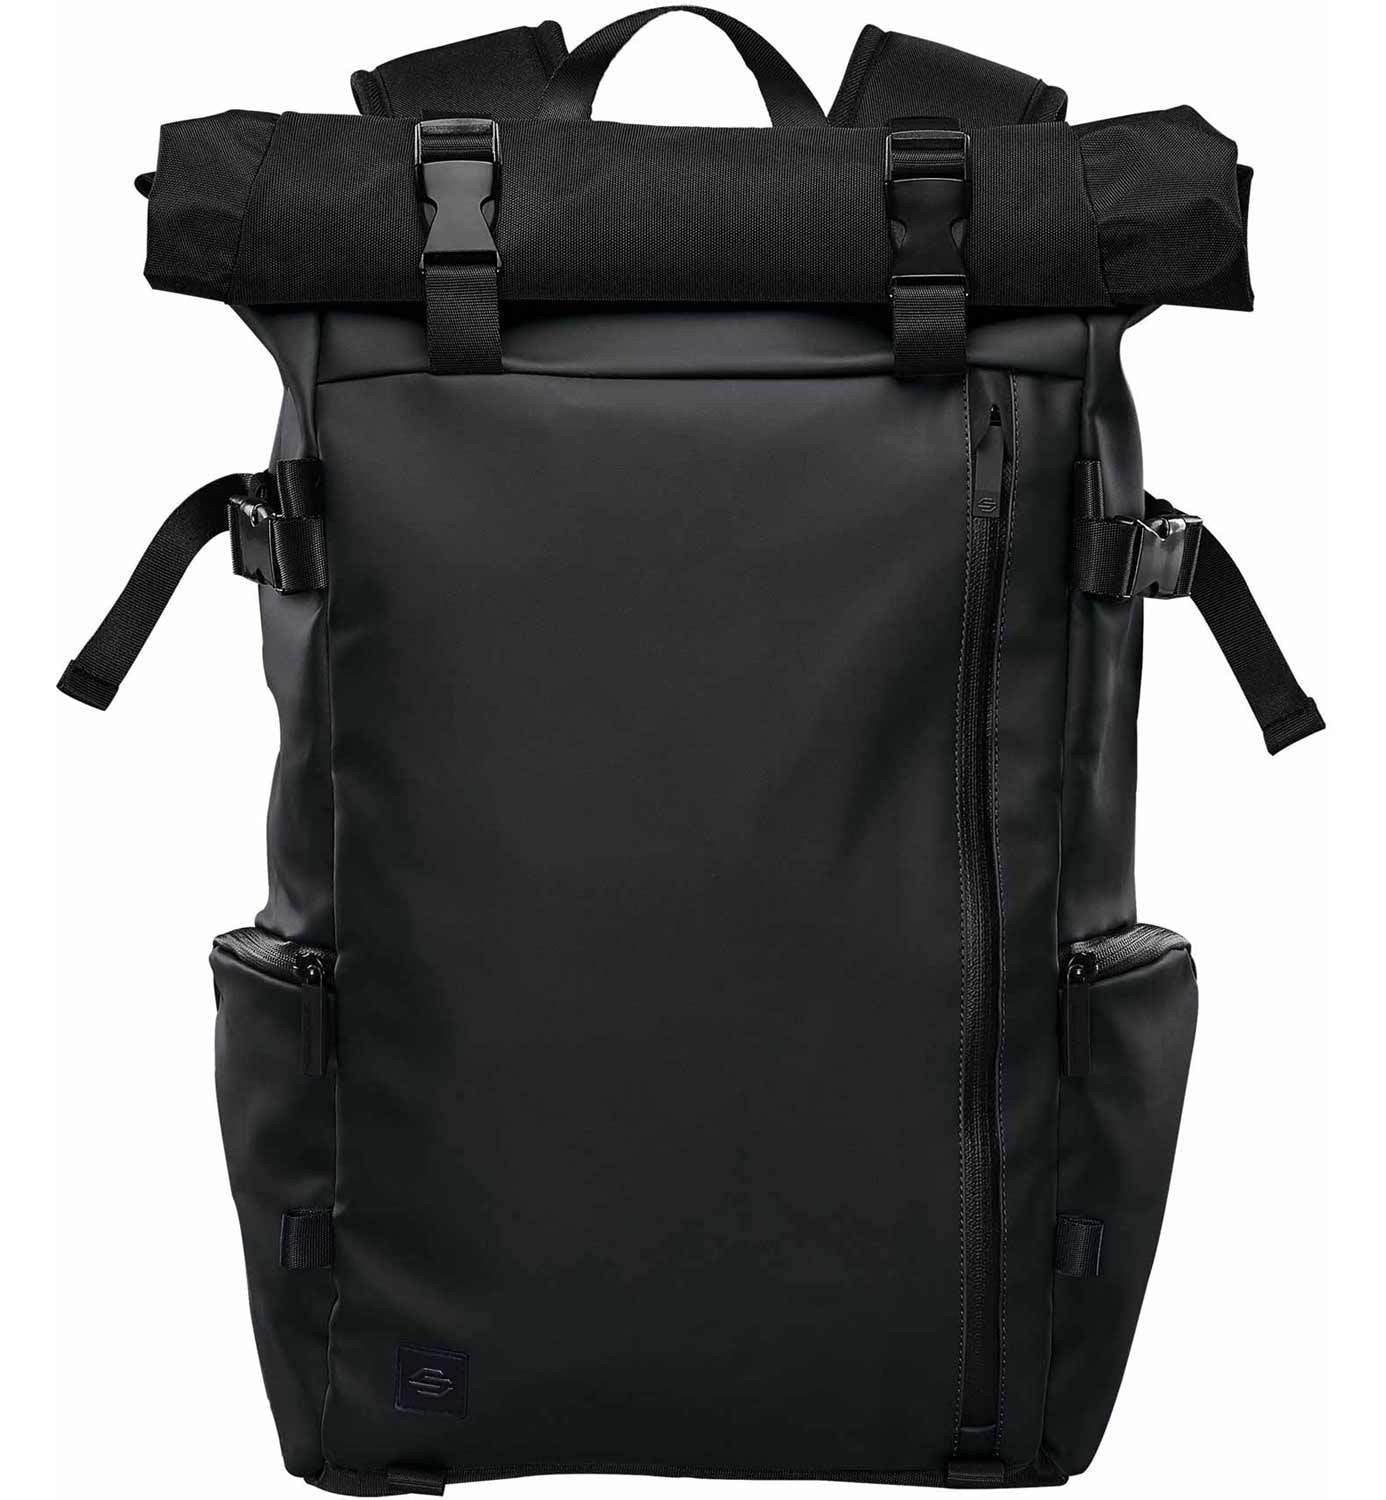 RTB-1 Norseman roll top pack